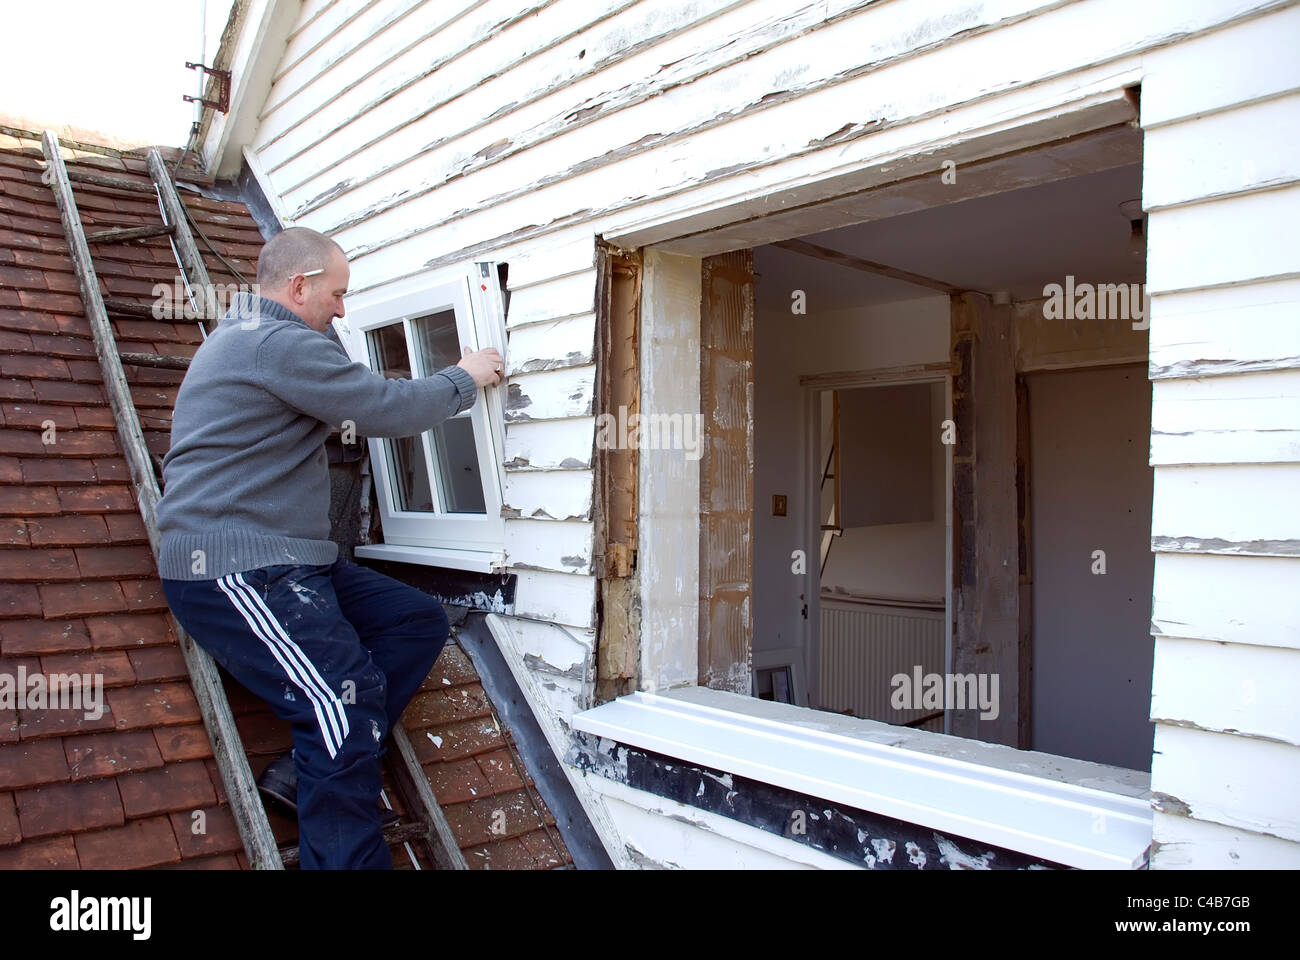 Installing A rated energy efficient replacement double glazed windows on an old house Stock Photo